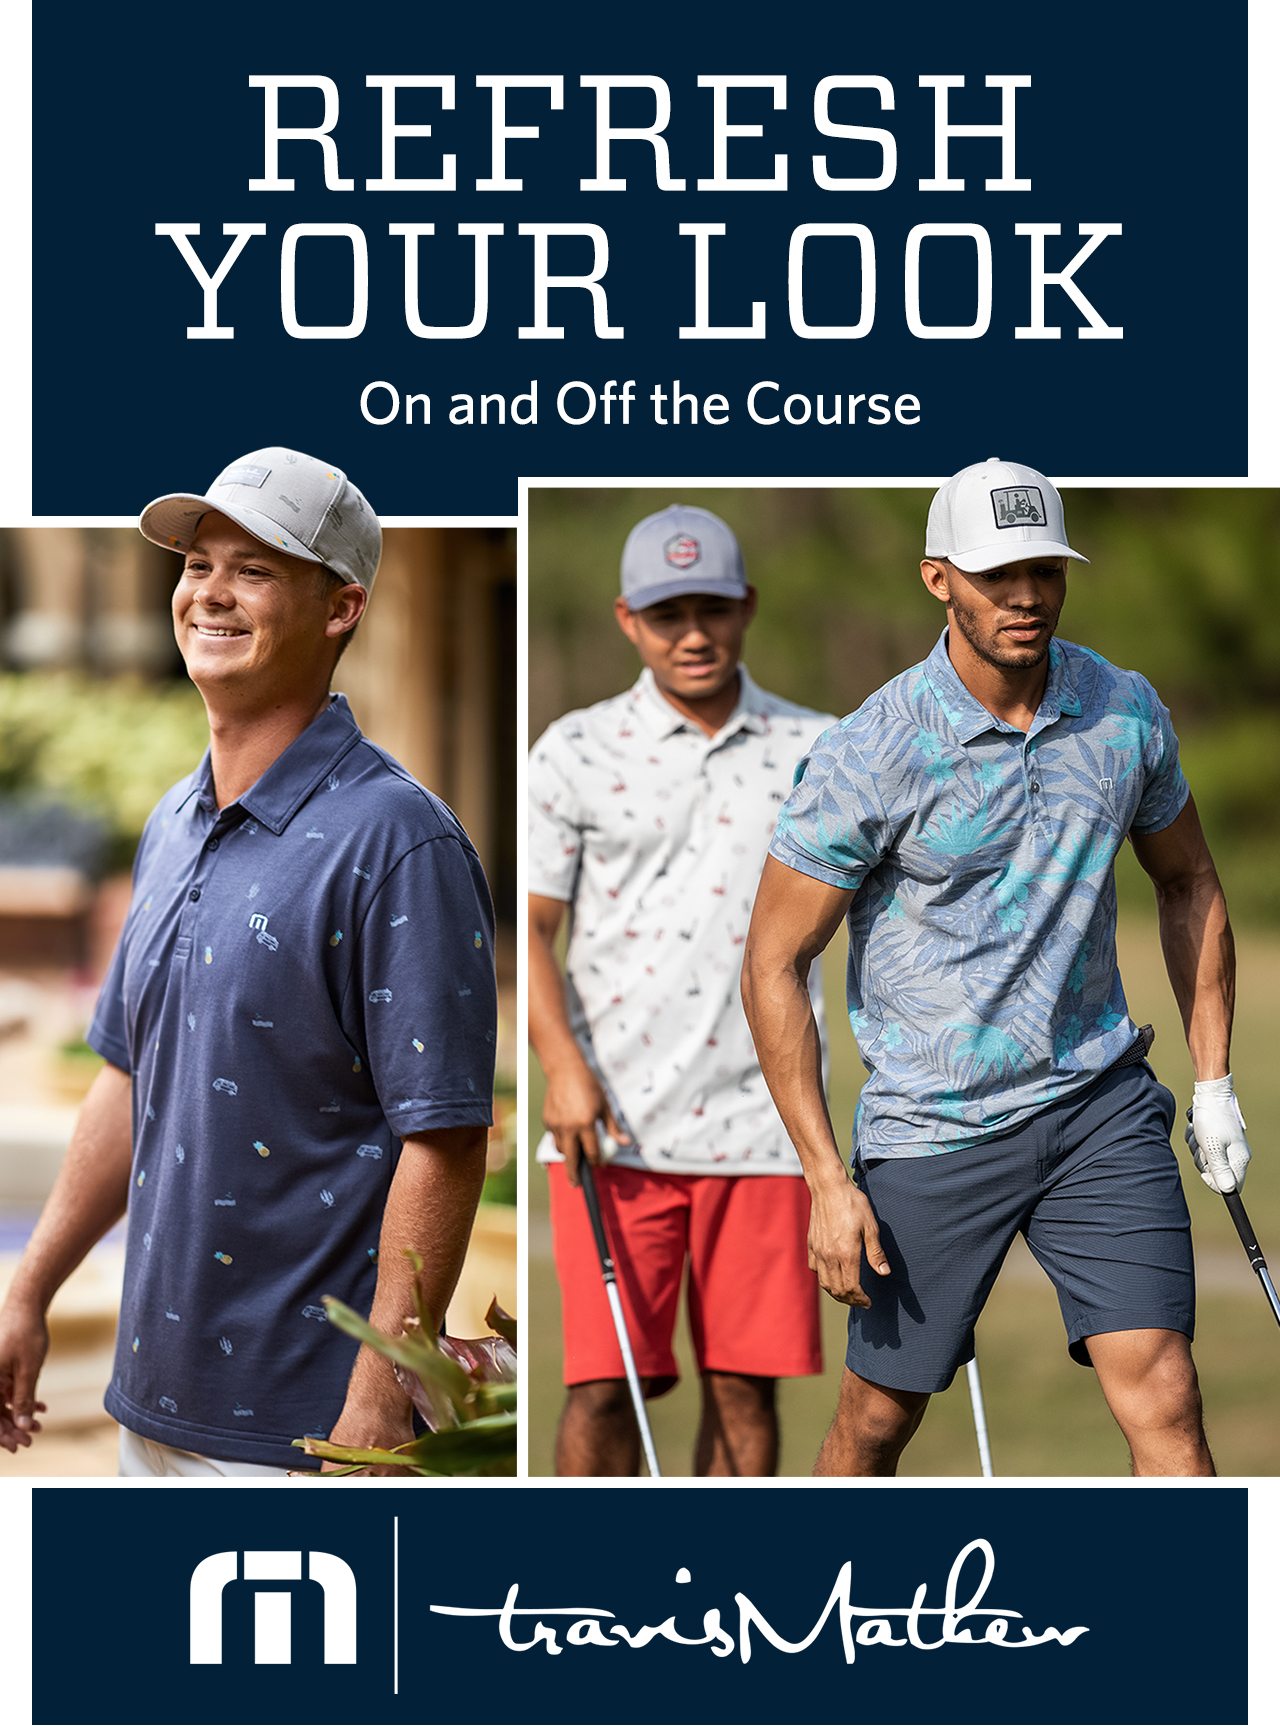 Refresh your look on and off the course. TravisMathew.